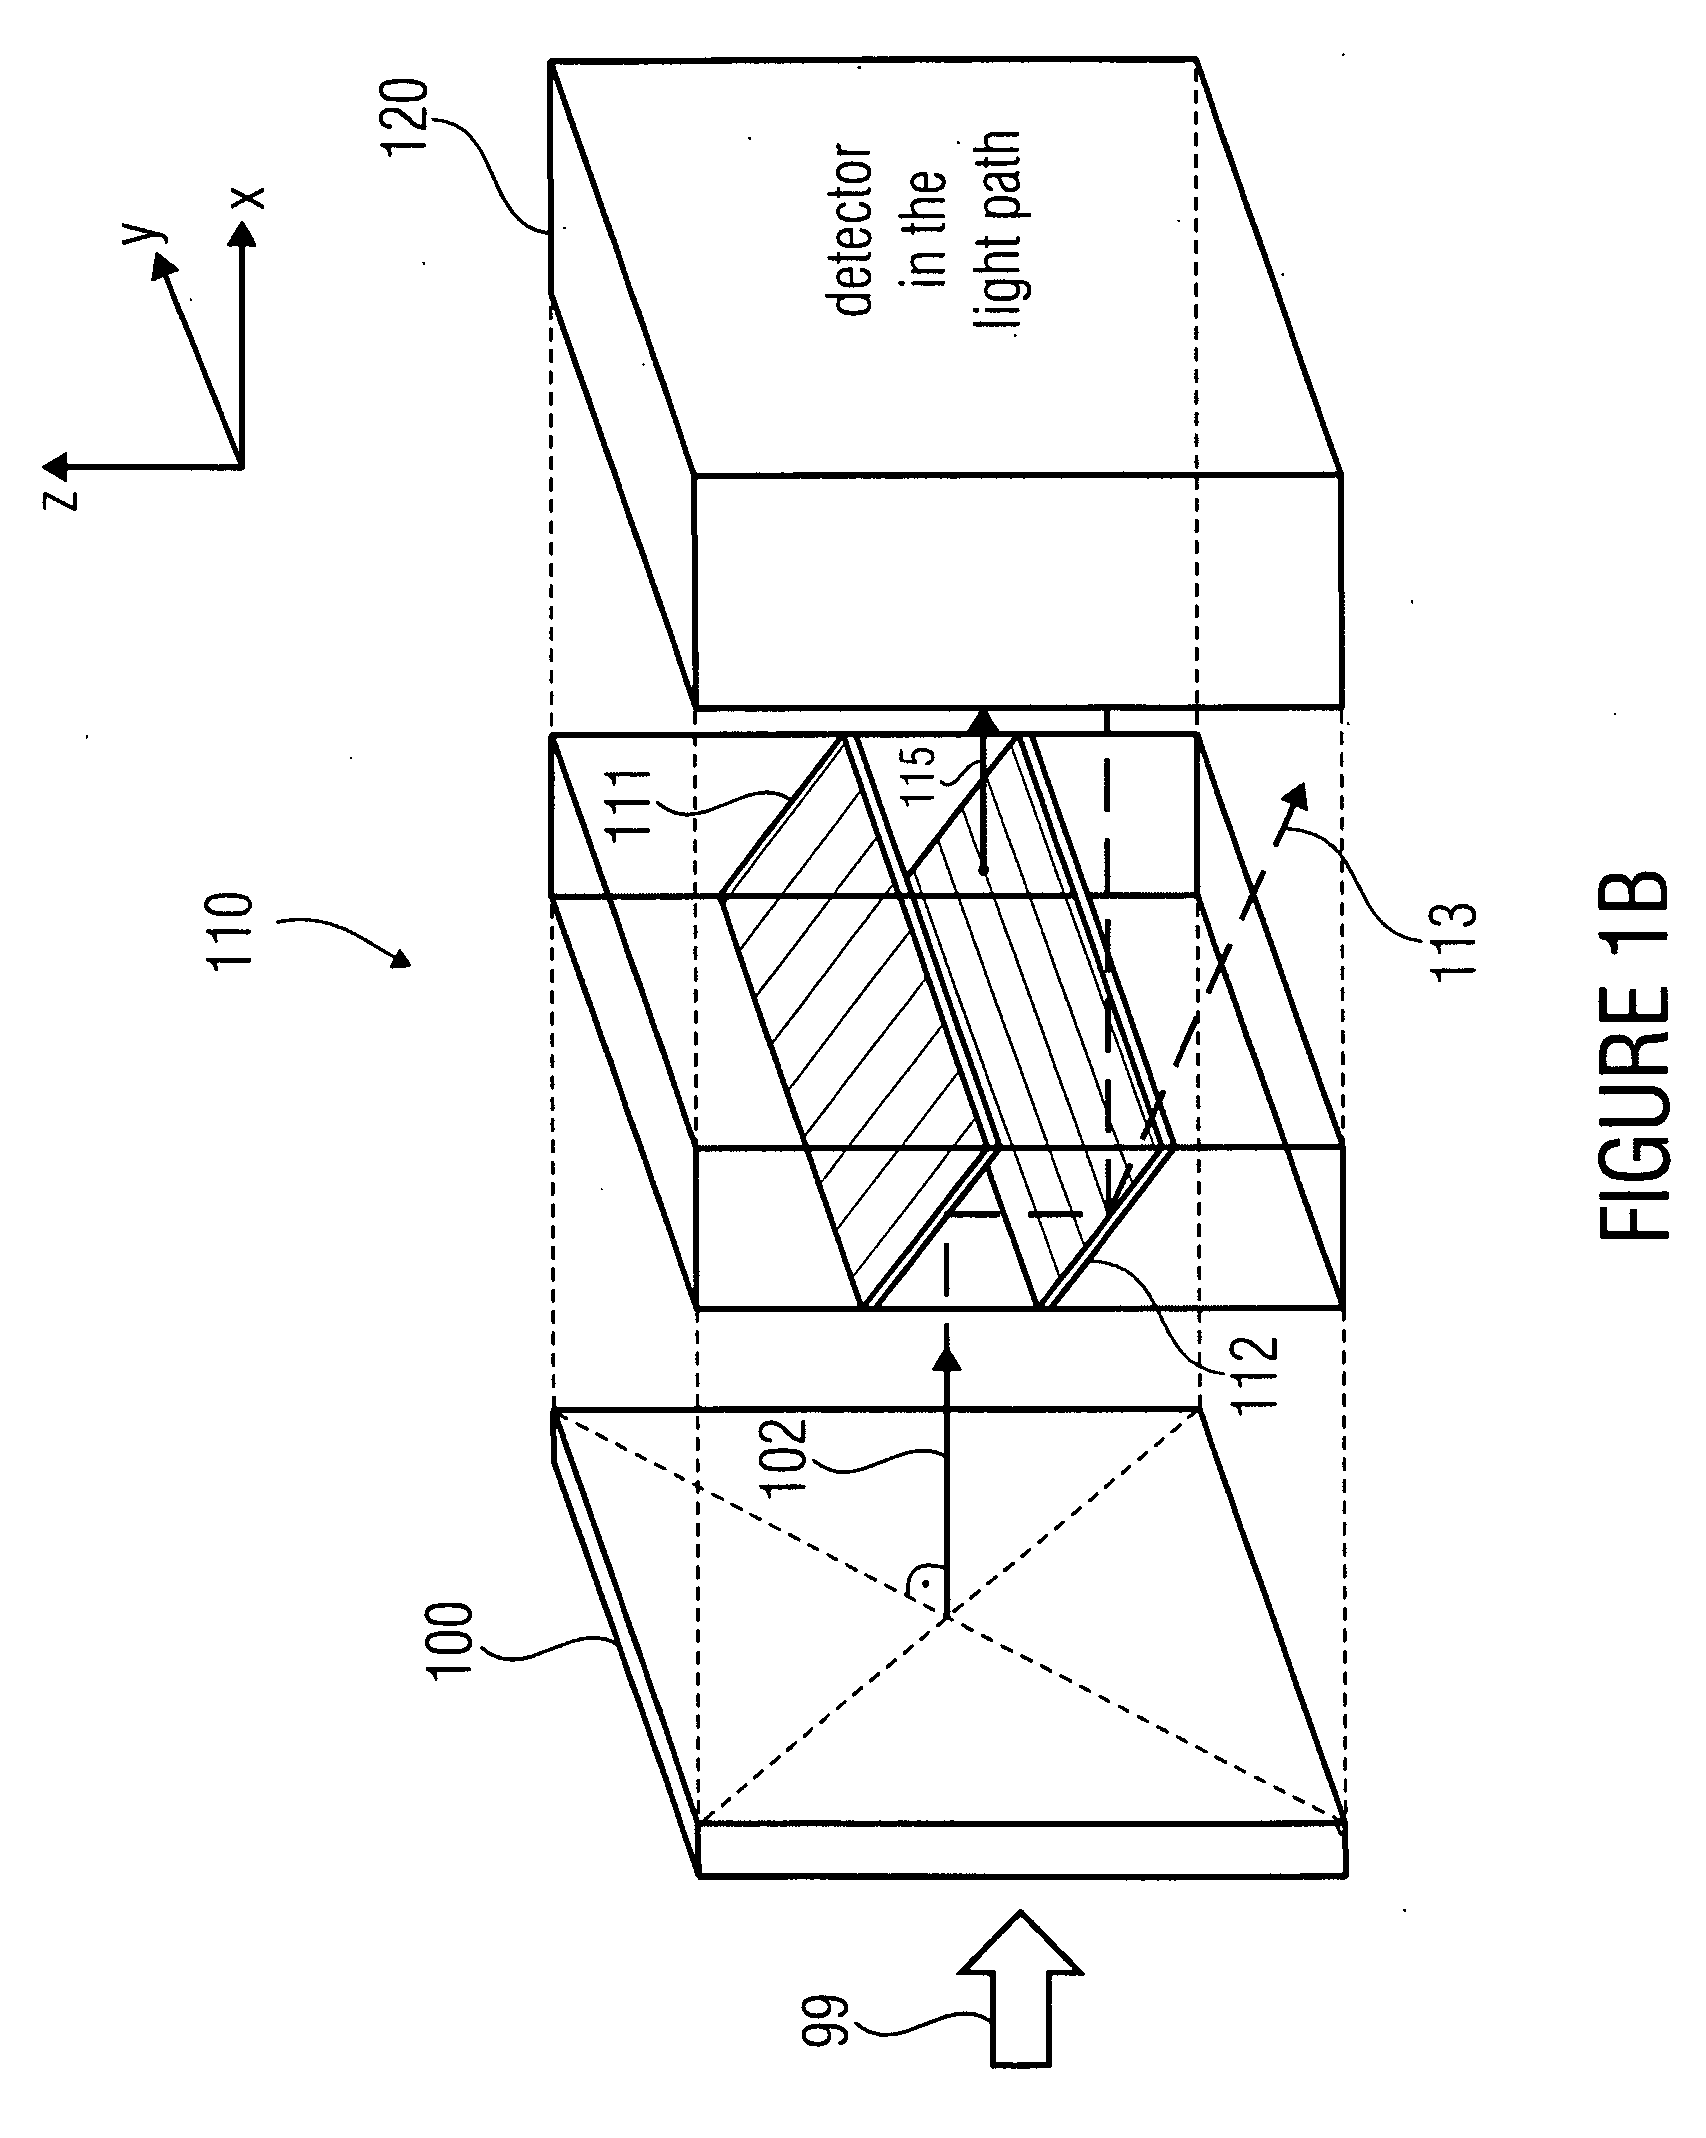 Apparatus and method for detecting an image